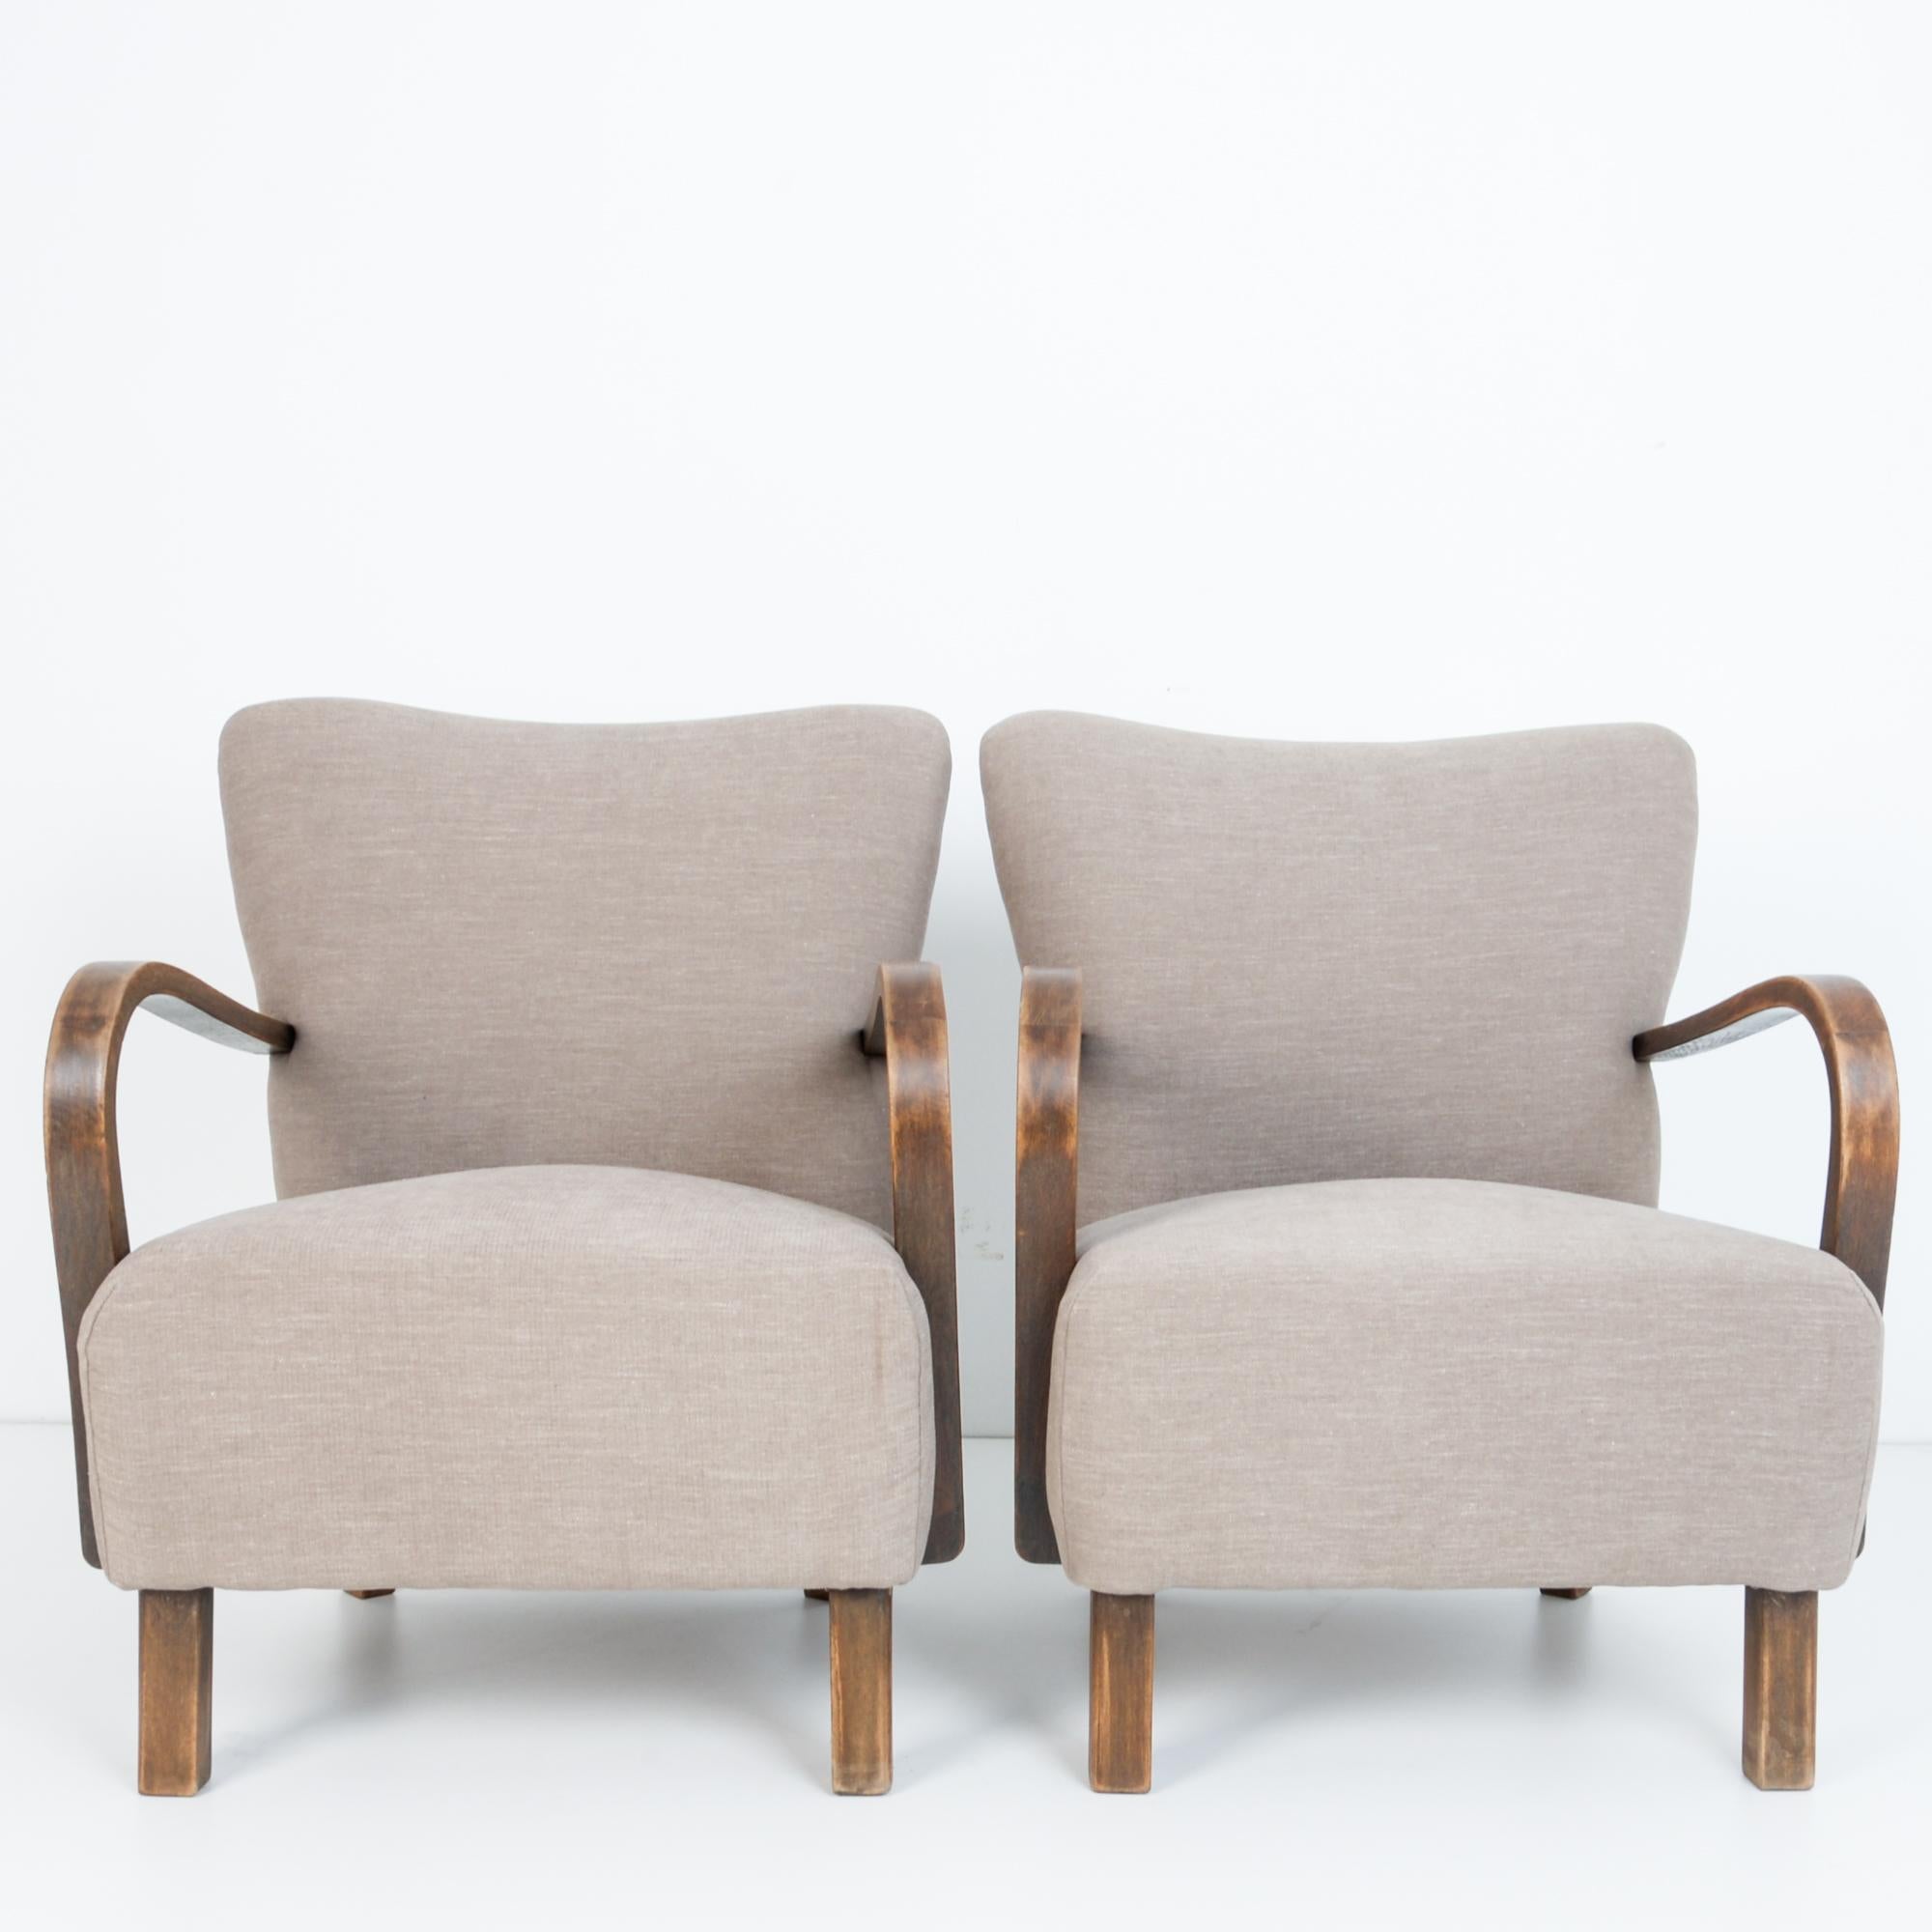 From Czech Republic circa 1950 a comfortable and stylish pair of upholstered armchairs. In typical mid-20th century Modernist style, a timeless approach that still looks contemporary and fresh. This chair features distinctive geometric frame from